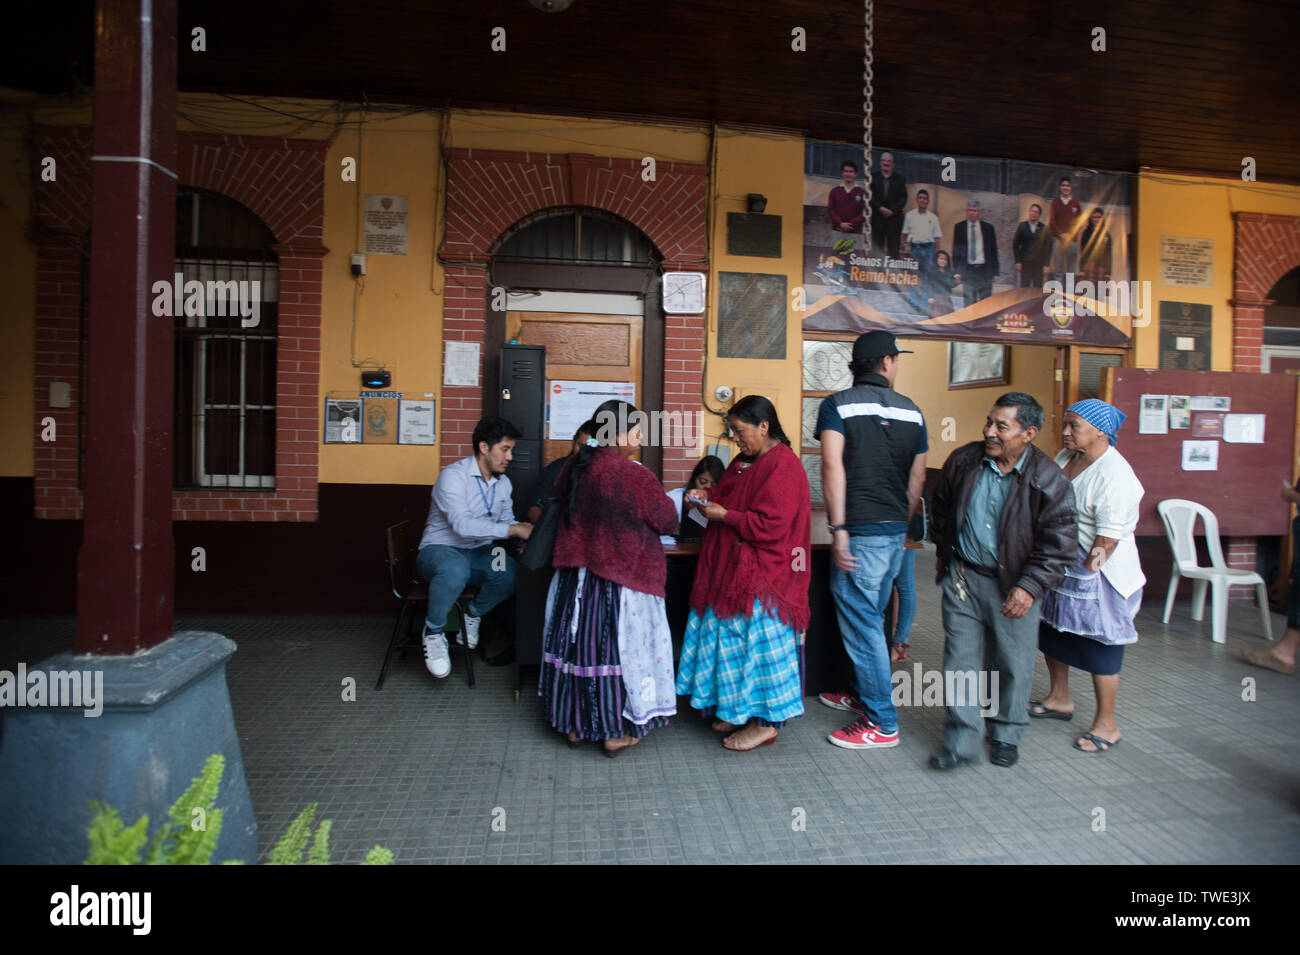 June 16, 2019 - Quetzaltenango, Quetzaltenango, Guatemala - Voters register to vote at a polling station during the first round of presidential election in Quetzaltenango in Guatemala June 16, 2019. (Credit Image: © Hiroko Tanaka/ZUMA Wire) Stock Photo